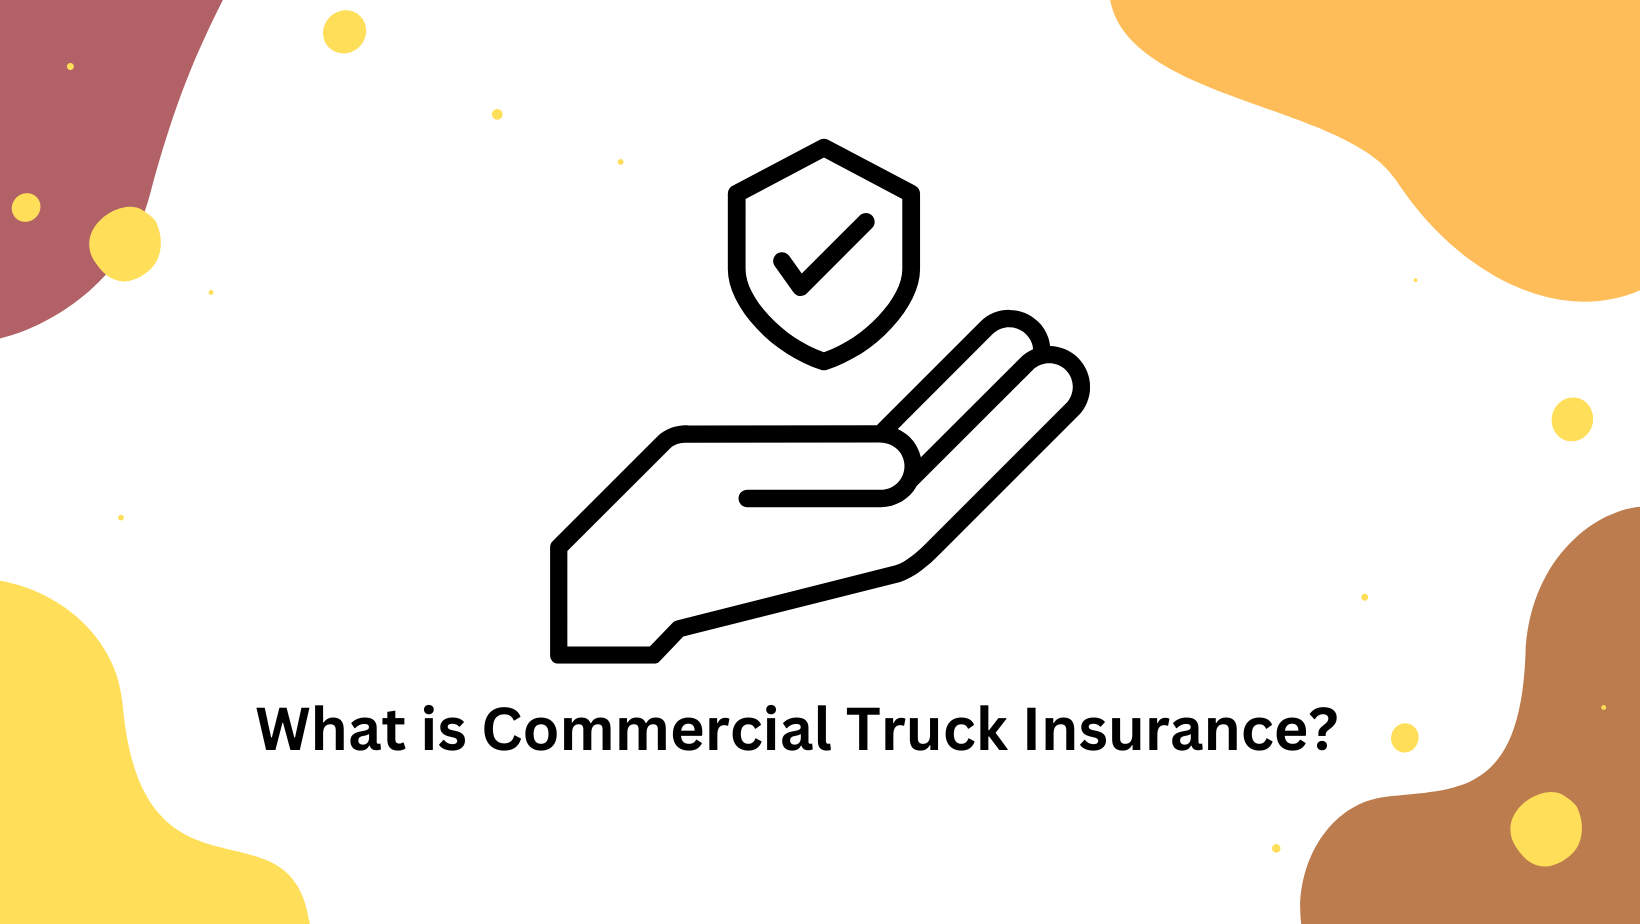 What is Commercial Truck Insurance